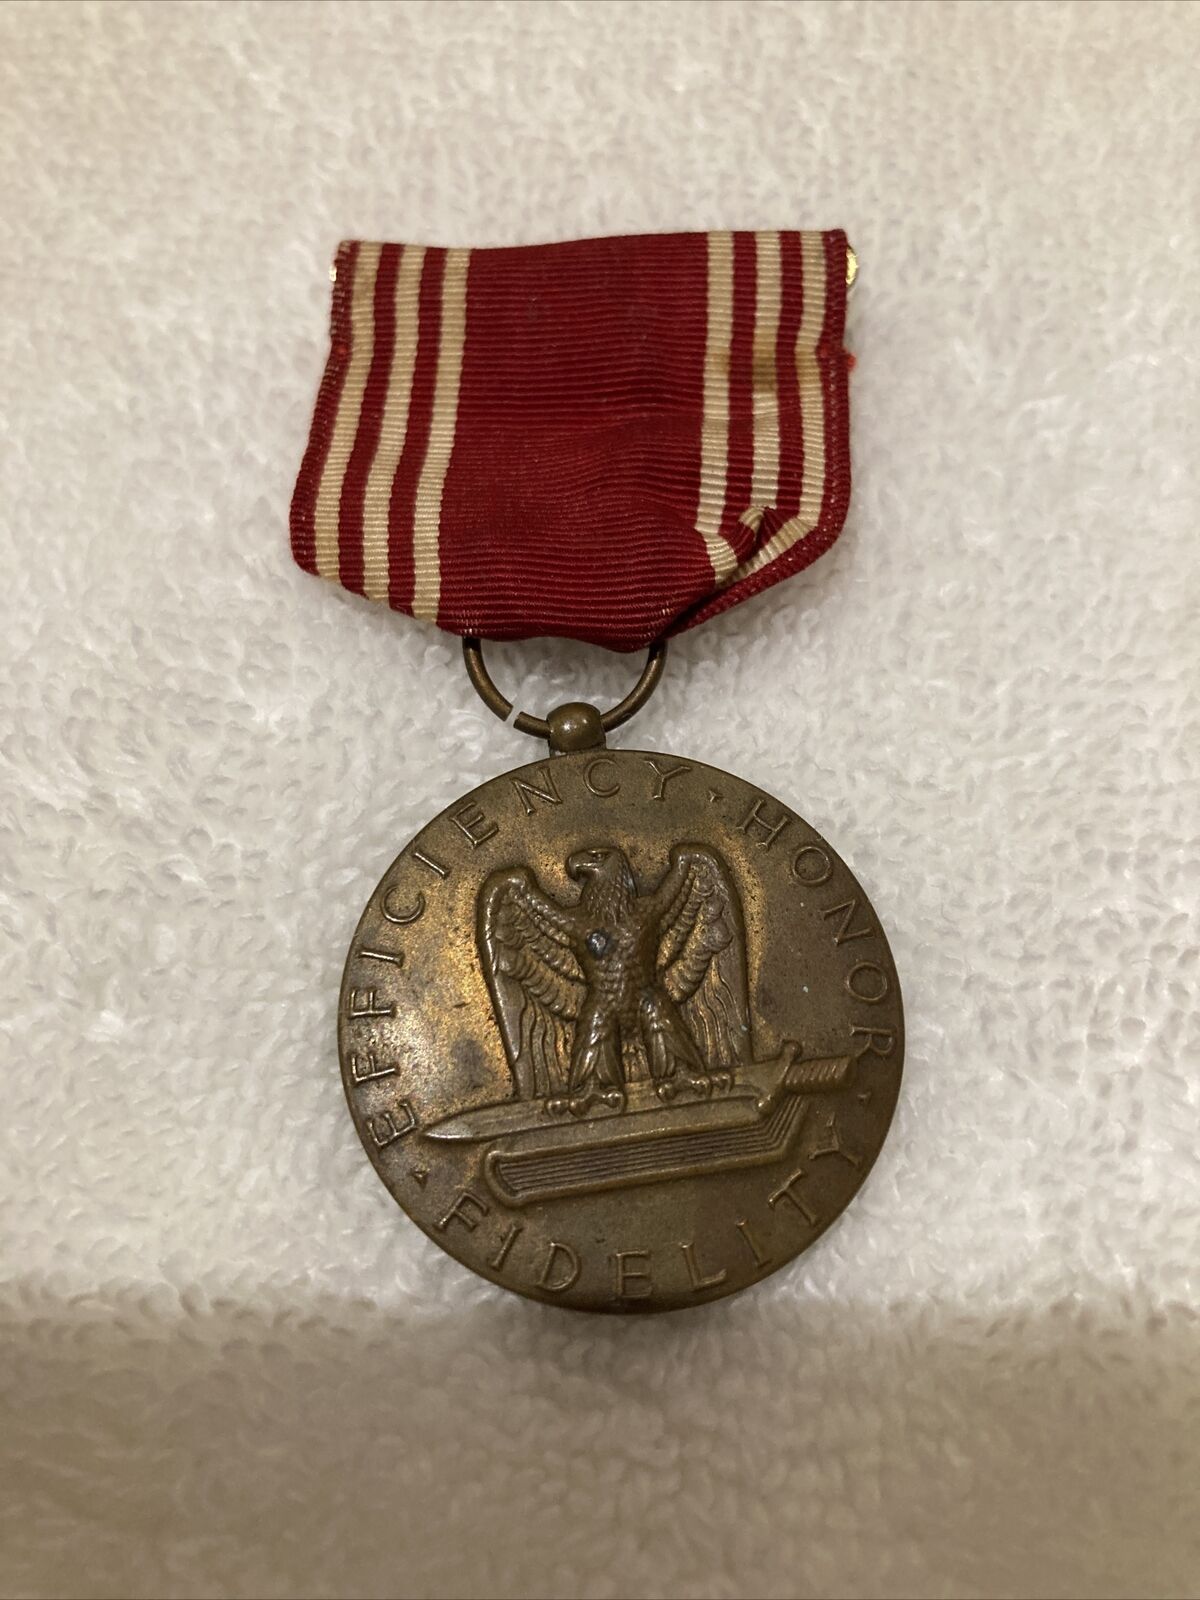 Vintage Efficiency, Honor, And Fidelity Medal And Ribbon With Pin